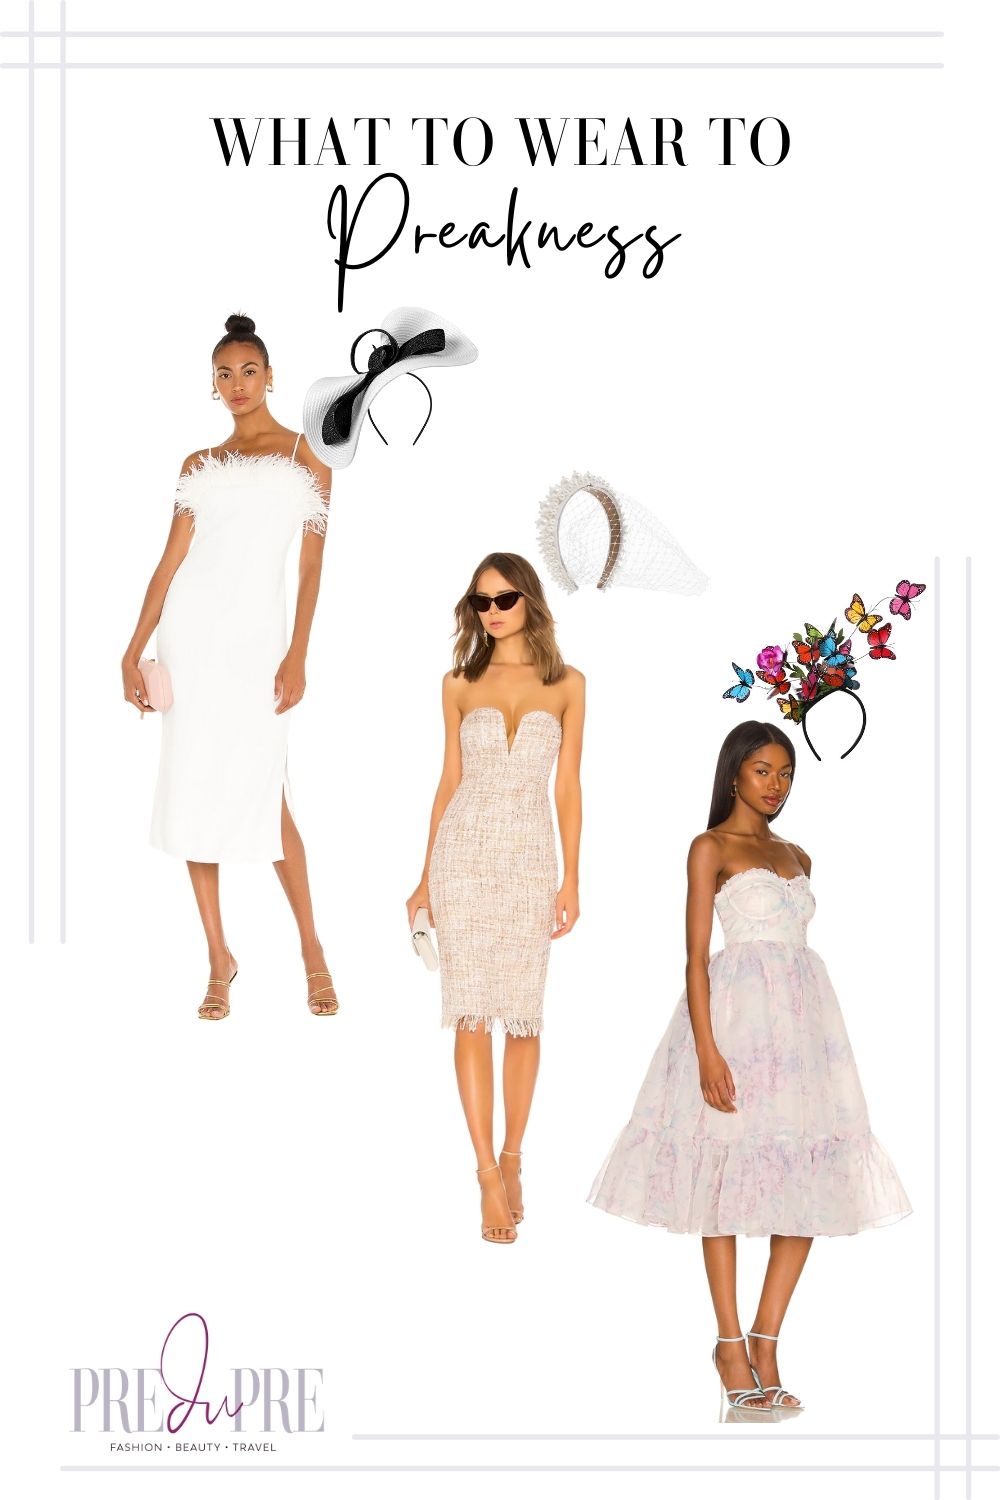 dresses and headbands for Preakness or horse race event